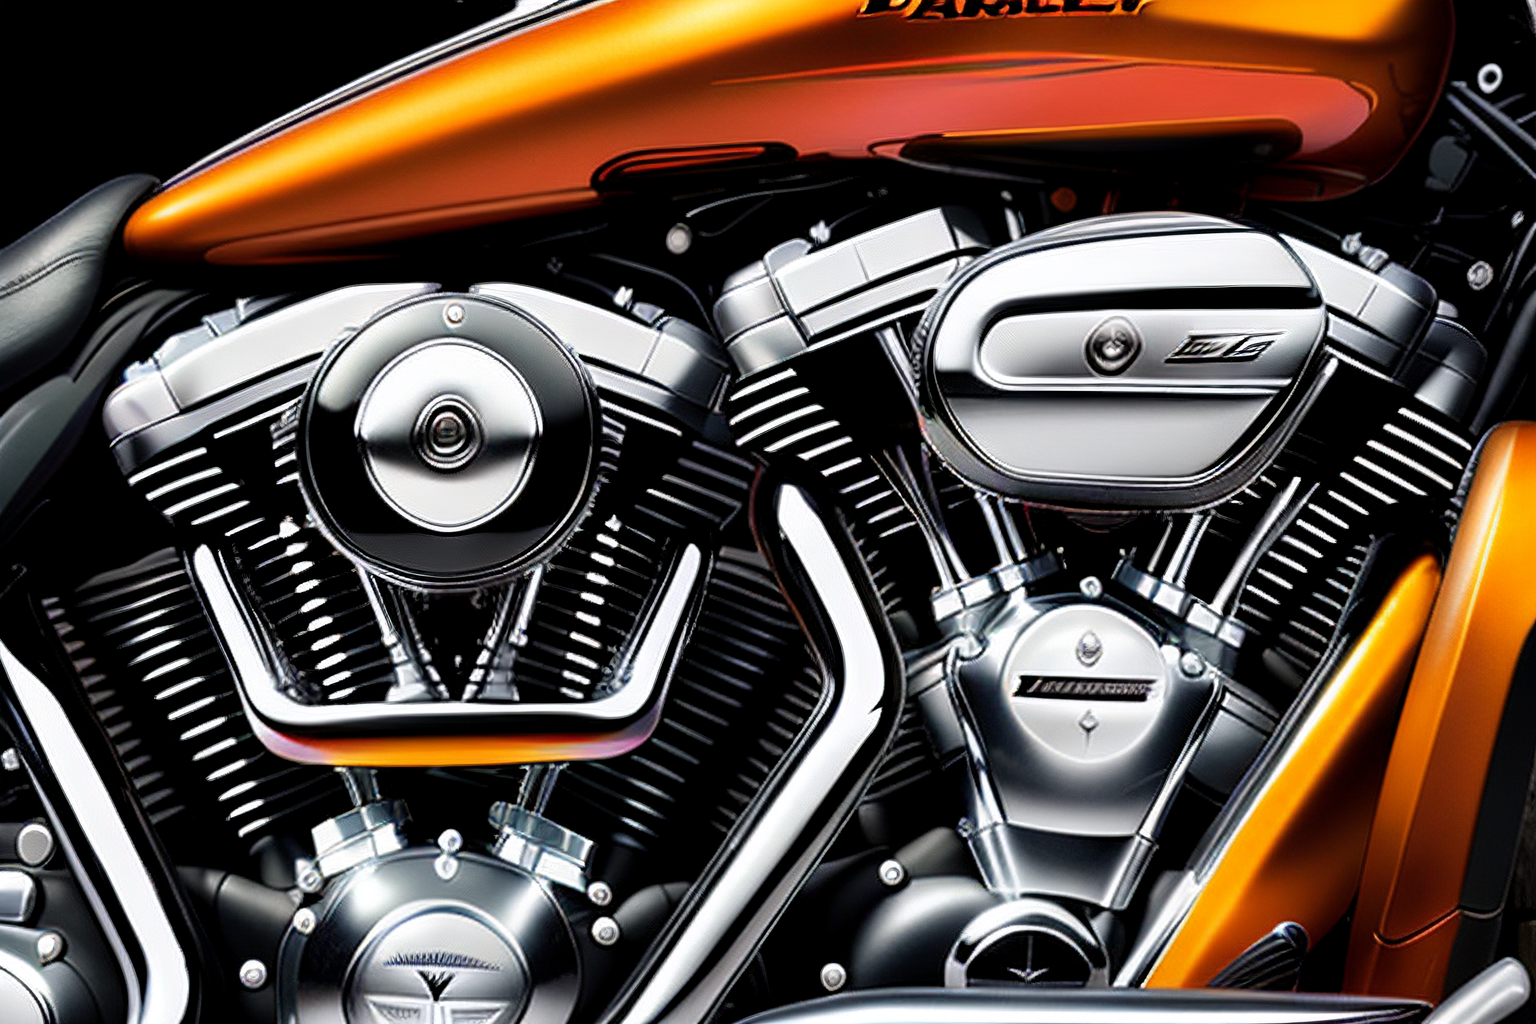 Harley Davidson Electronic Throttle Control Problems